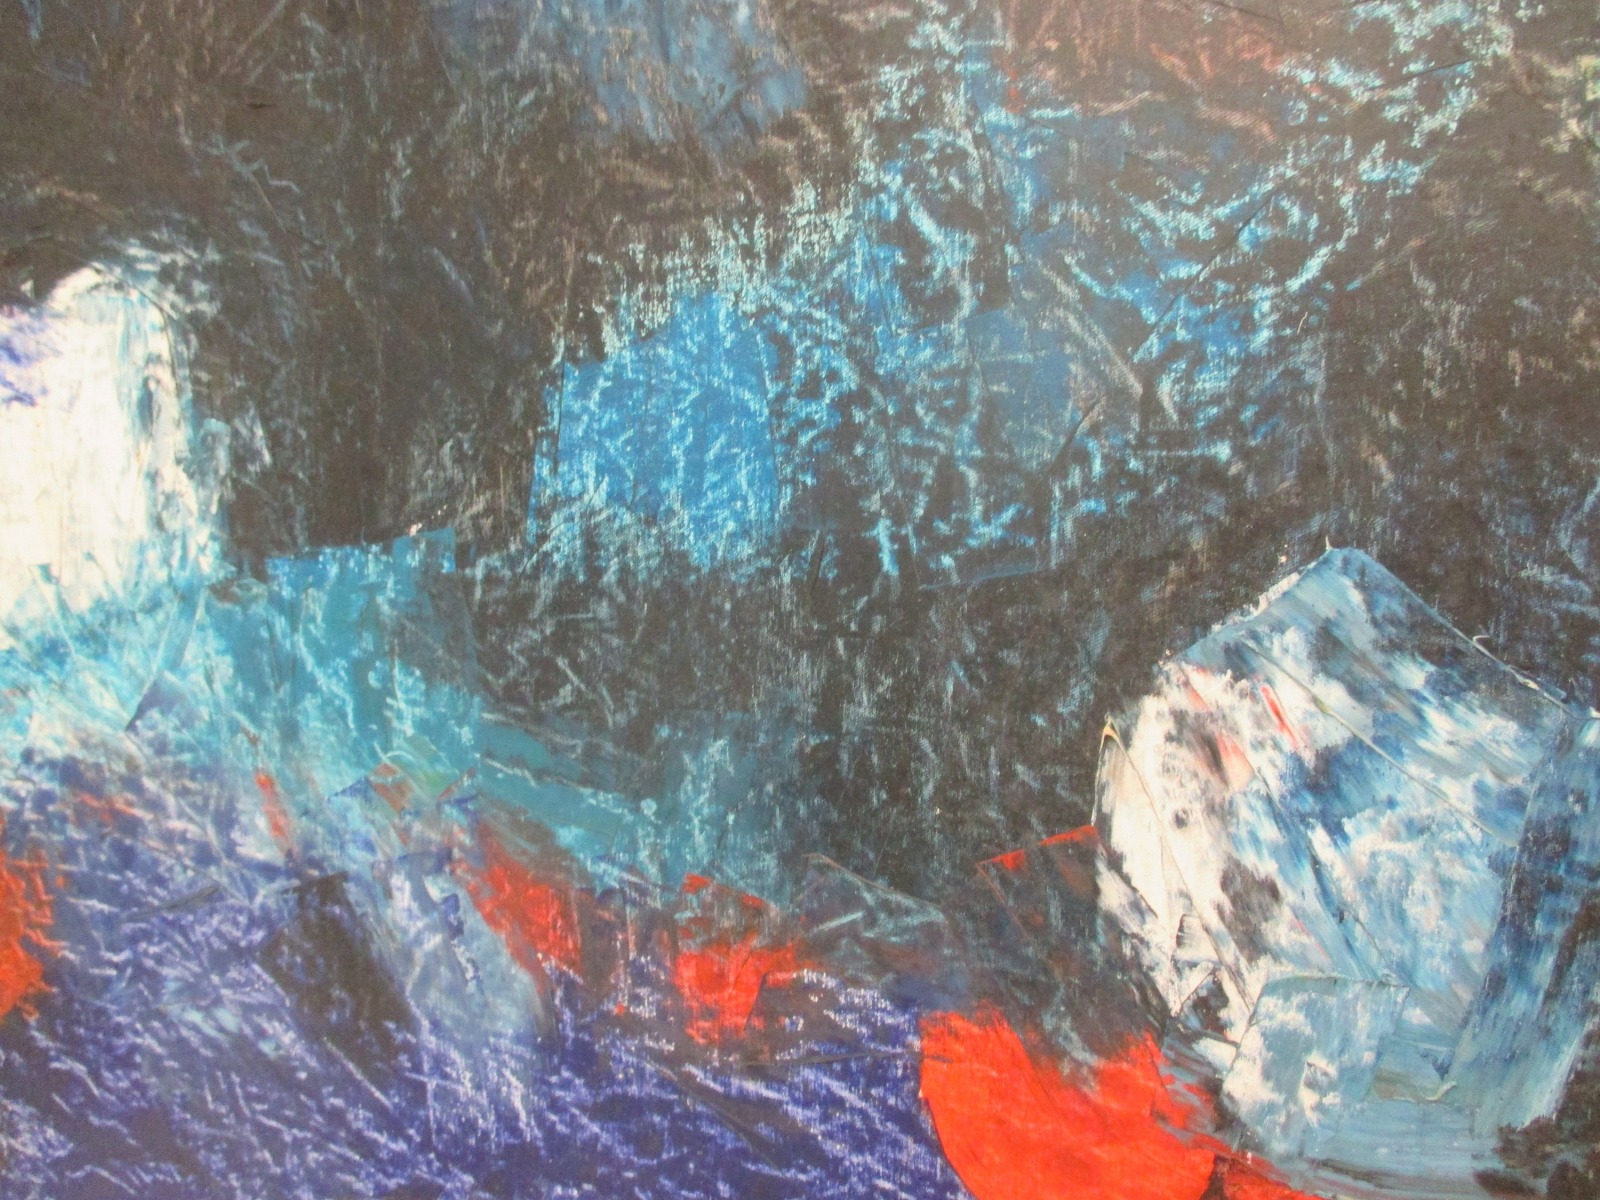 dark blue and red Painting, Art, abstract Canvas, Original by Sonja Zeltner-Müller 5